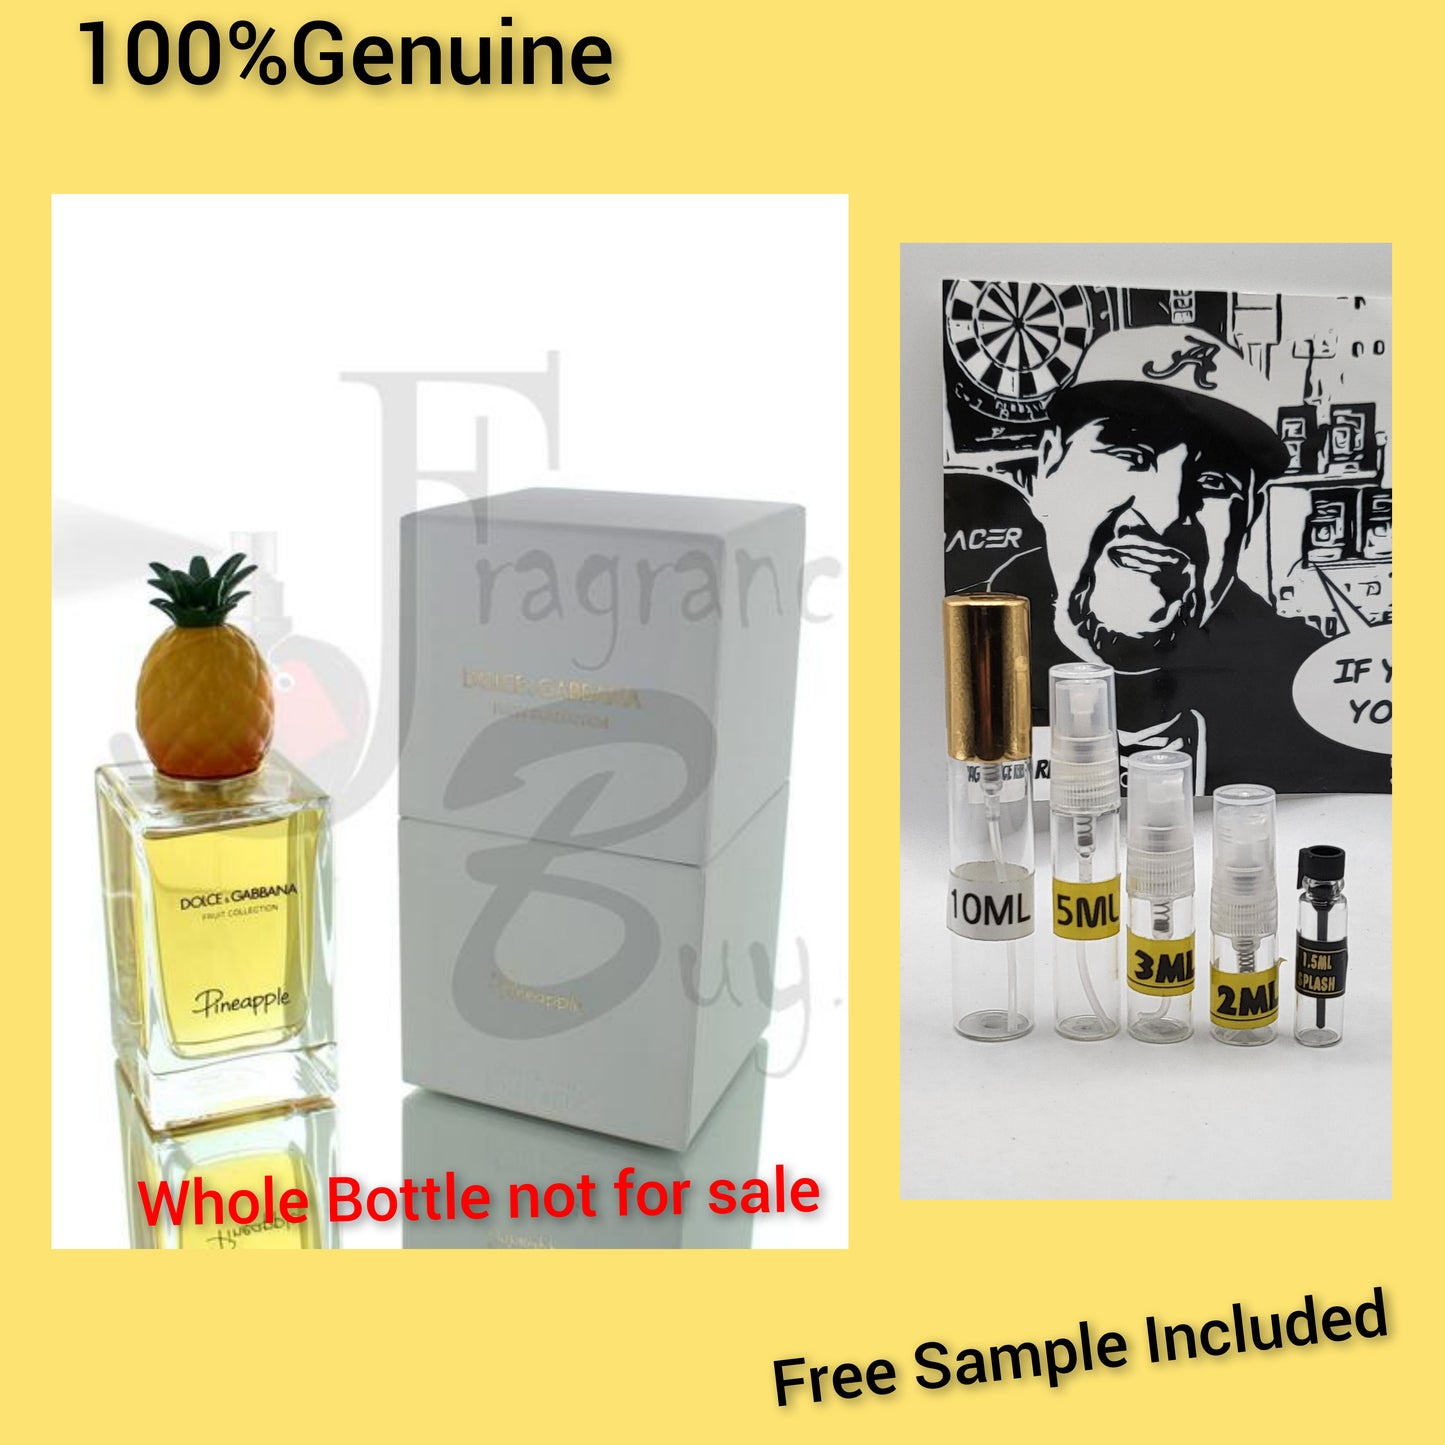 Pineapple Dolce&Gabbana for women and men Decants. Comes with free sample and bag